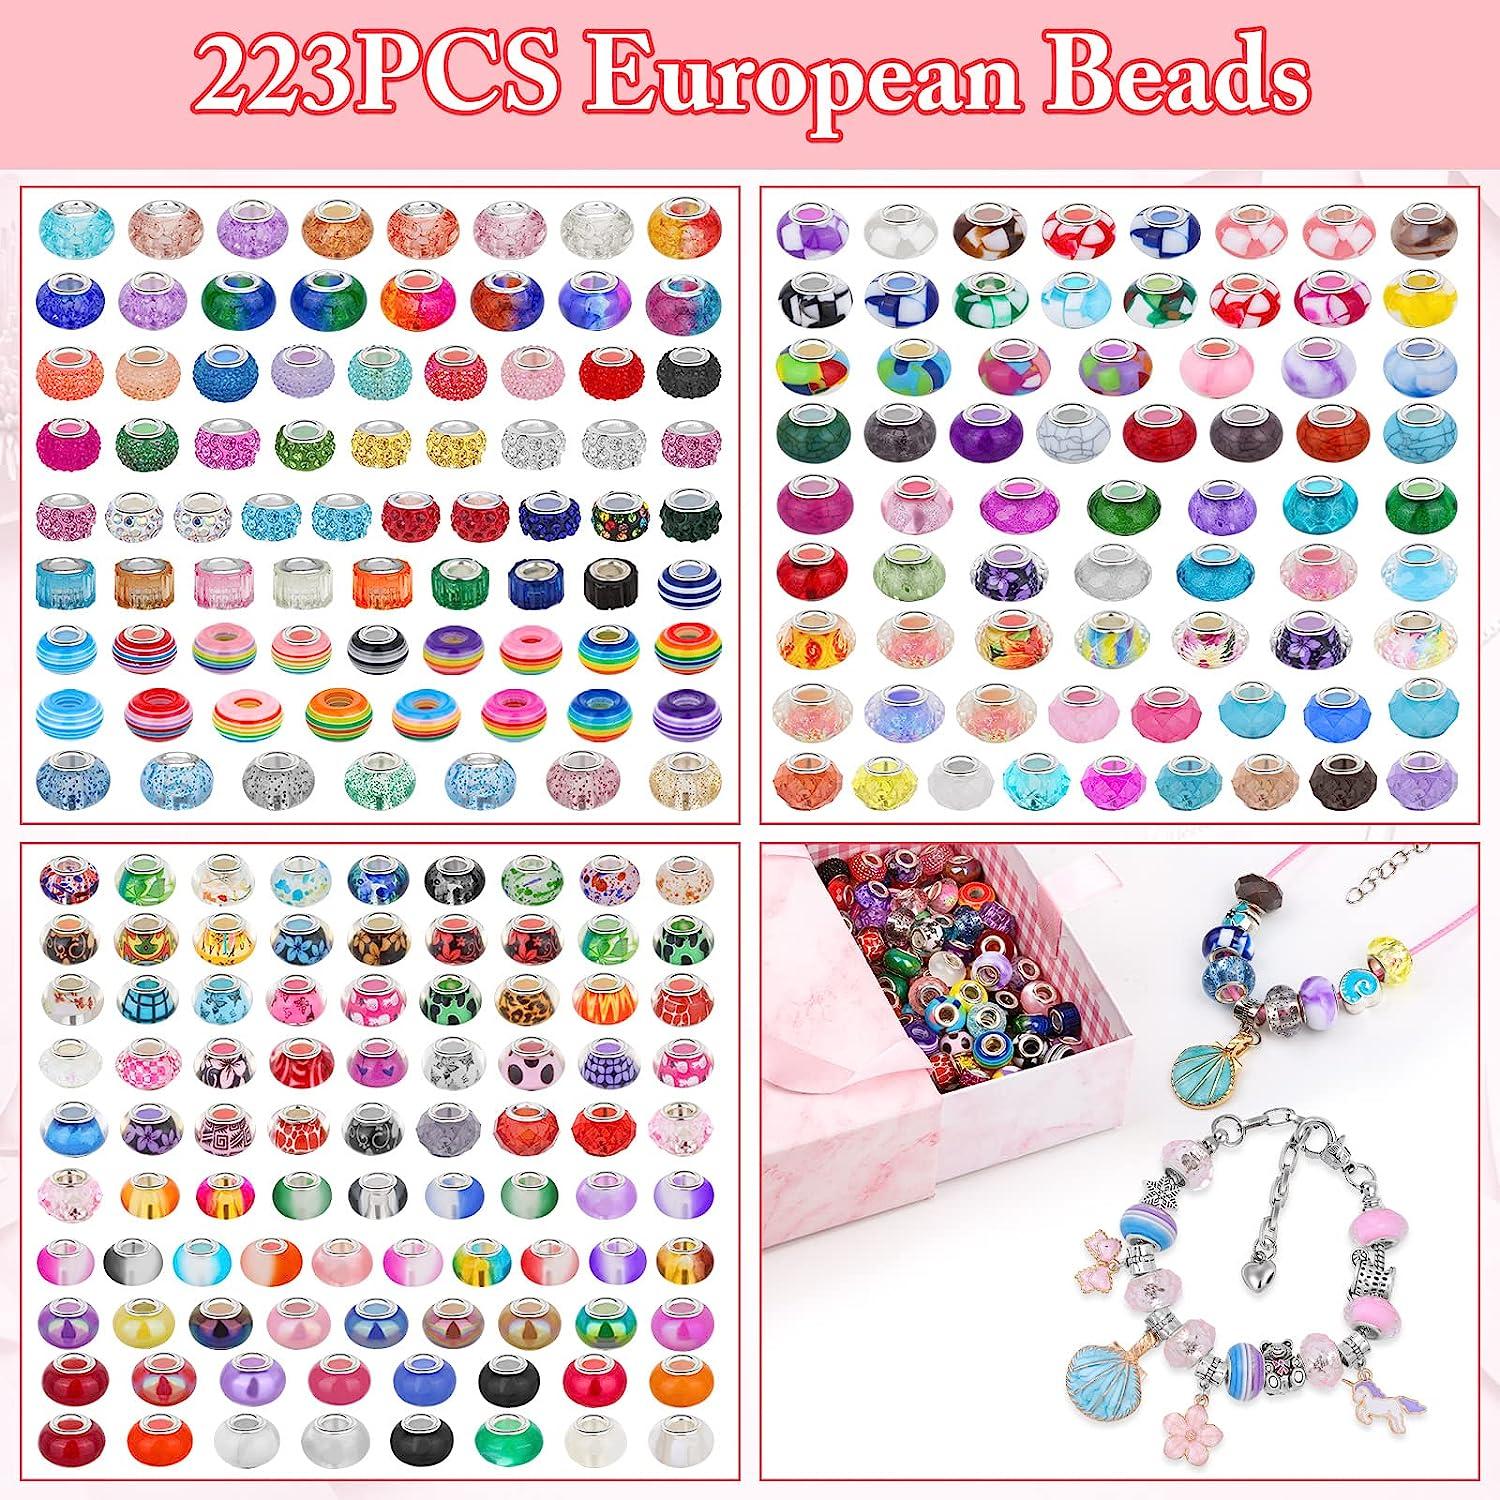 200 PCS European Beads Bulk for Jewelry Making,Cludoo Large Hole Beads  Spacer Beads with Mixed Color Rhinestone Charms Beads for DIY Craft  Bracelet Necklace Earring Making